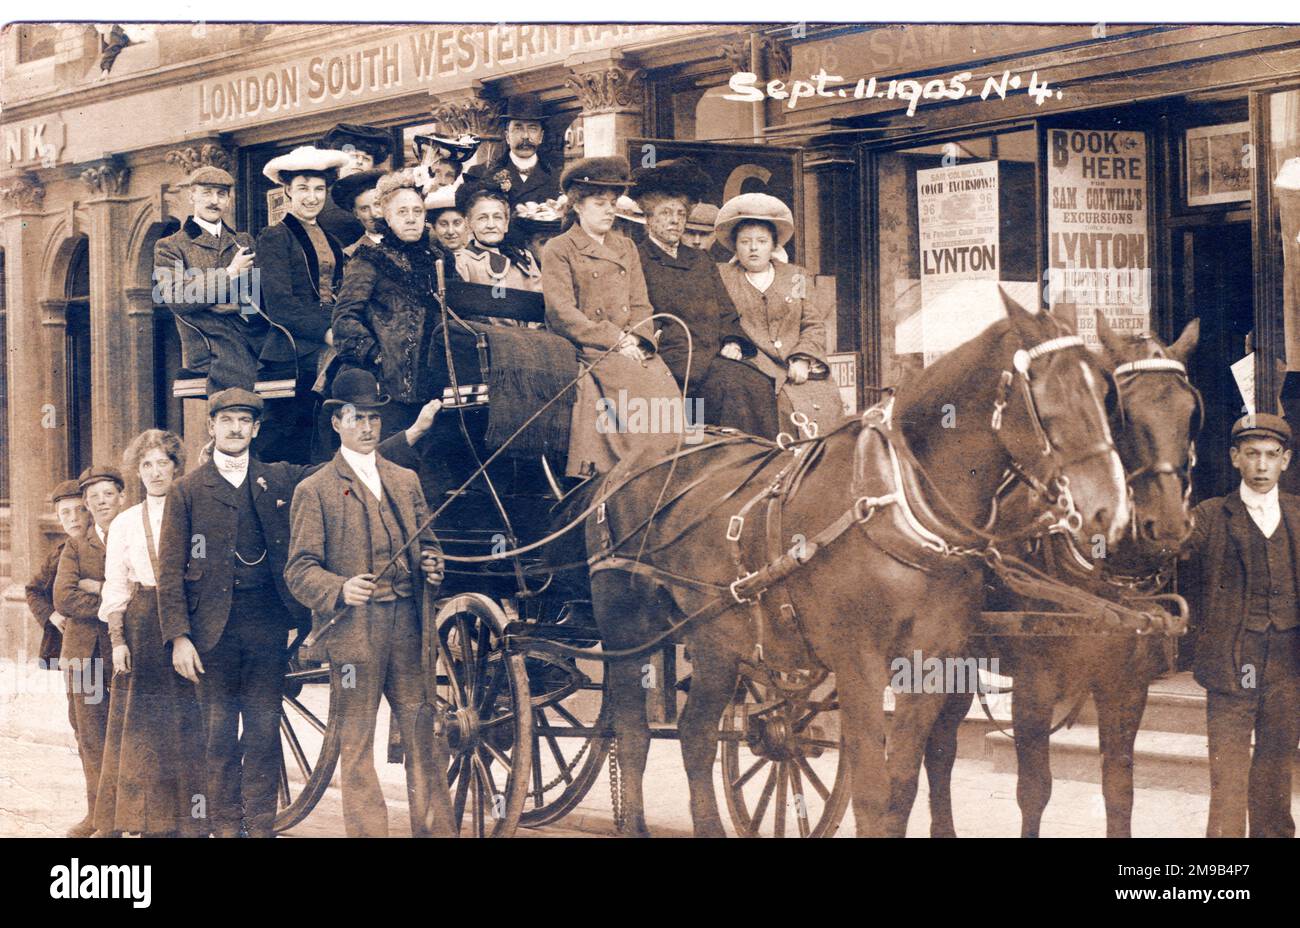 The coach and horses are outside the London South Western Railway offices in Lynton. A poster on the wall offers excursions by Sam Colwill. Driver beside the coach has a whip and a smart man with velvet collar overcoat, flat hat and pipe might just be Sam himself. The railway closed in 1922. Stock Photo